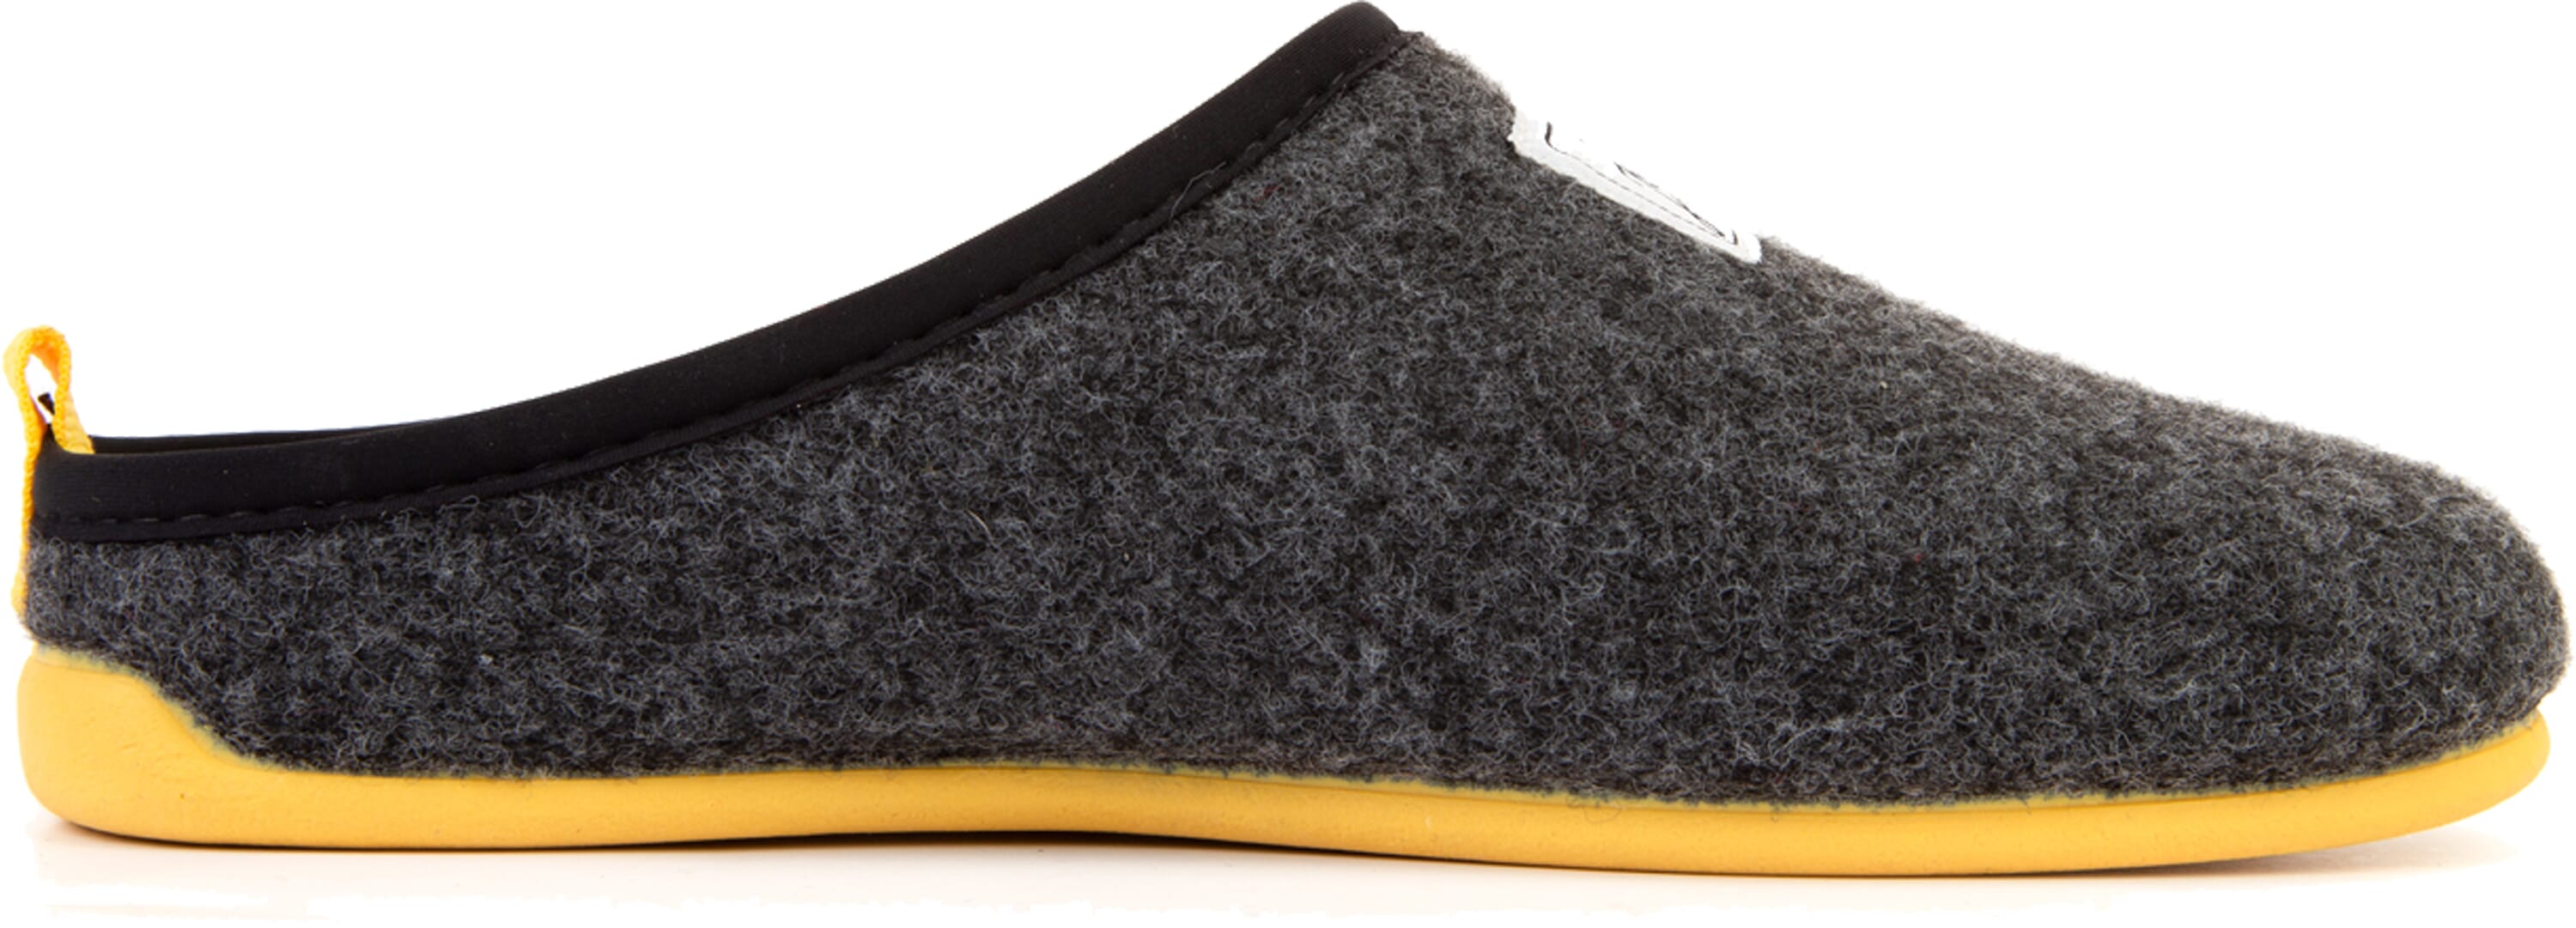 Sustainable slippers for eco-friendly lazy days by Hannah Rochell